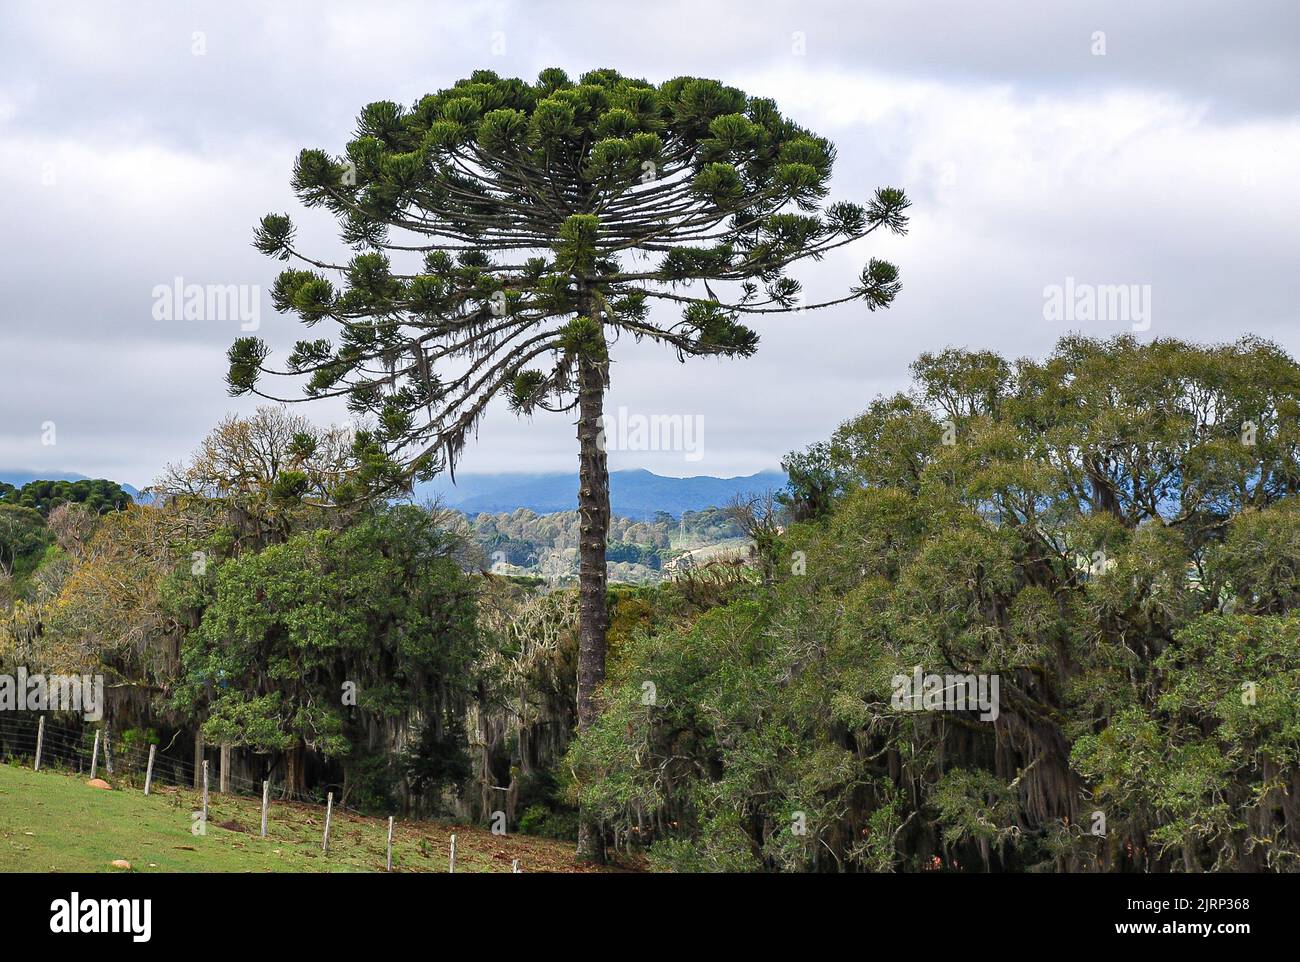 An araucaria tree (Araucaria angustifolia), the dominant tree species of the mixed ombrophilous forest, typical of southern Brazil, on a cloudy day. I Stock Photo